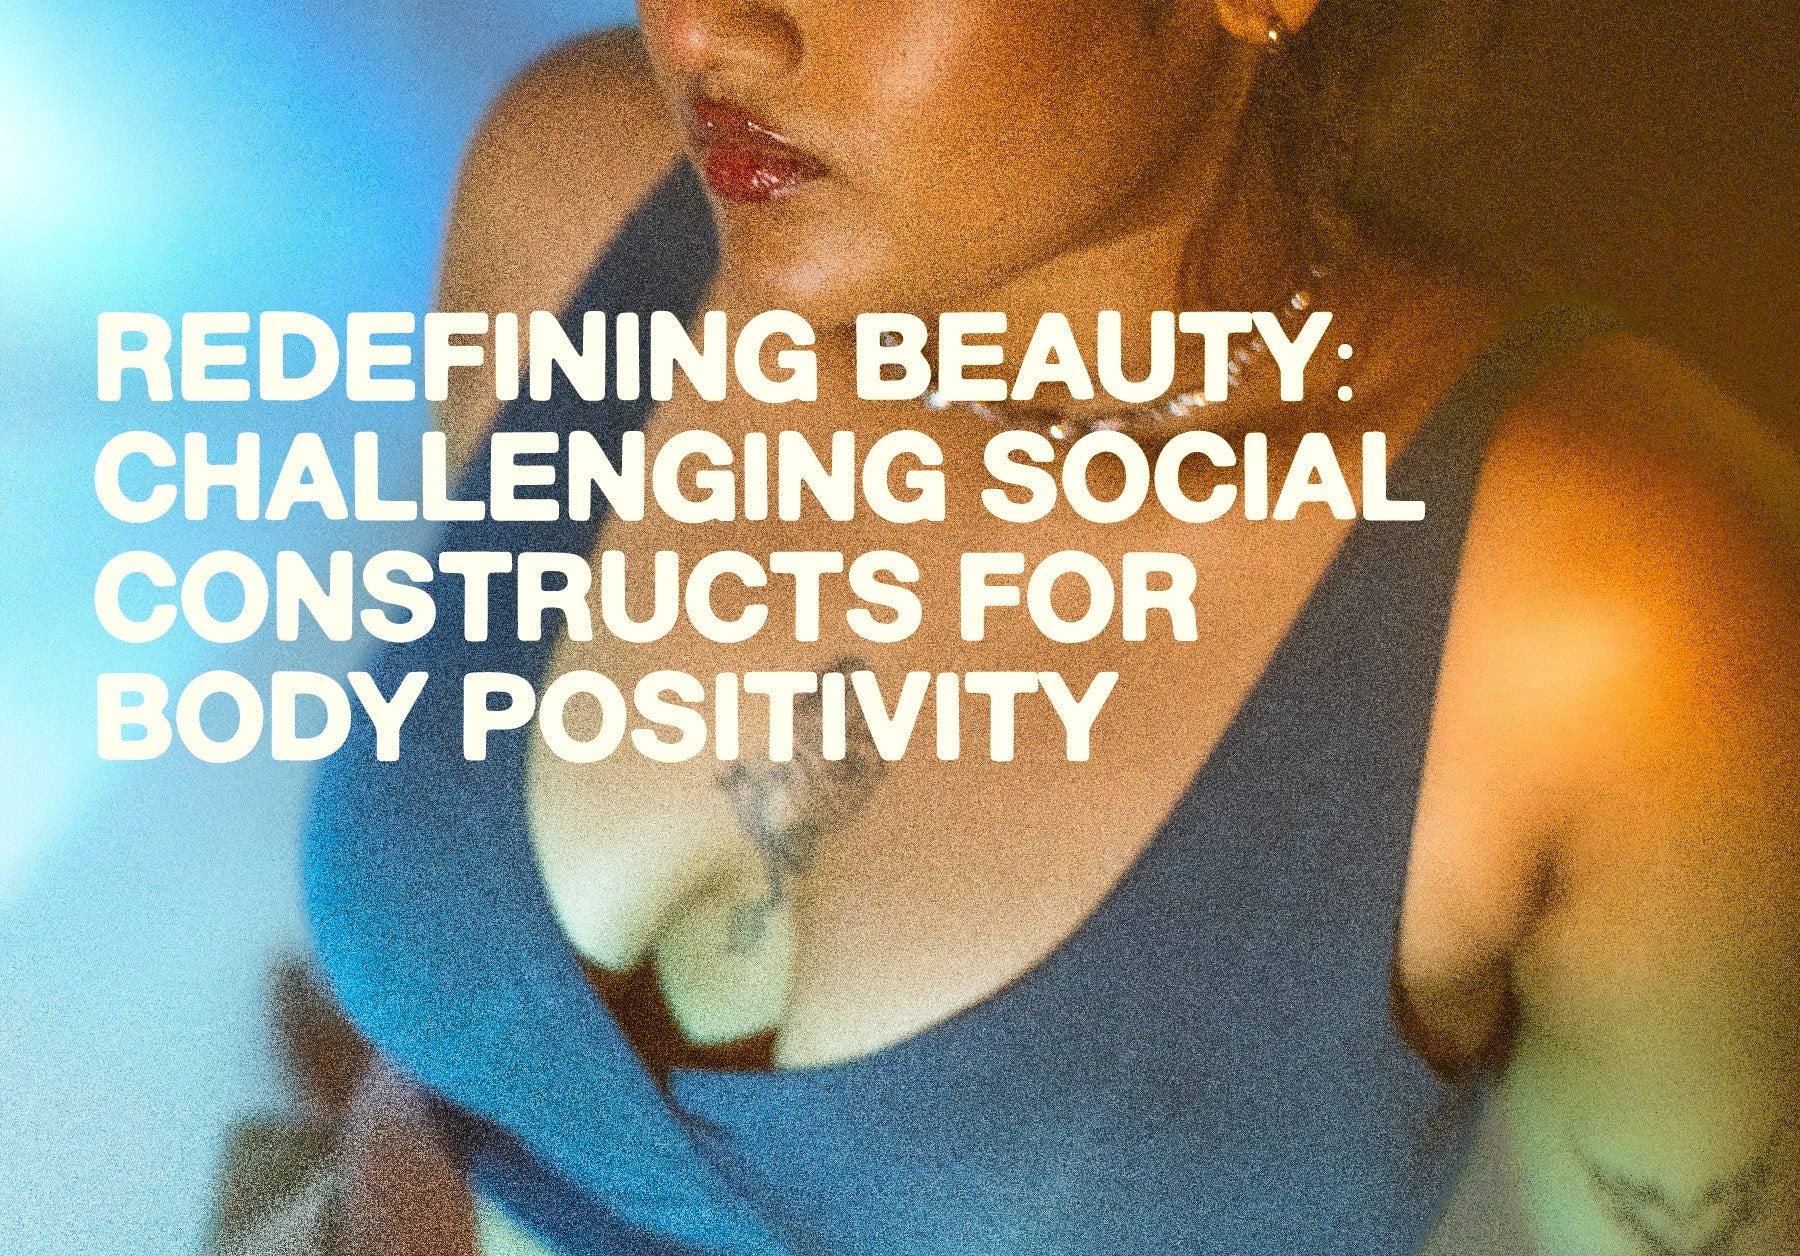 Redefining Beauty: Challenging Social Constructs for Body Positivity